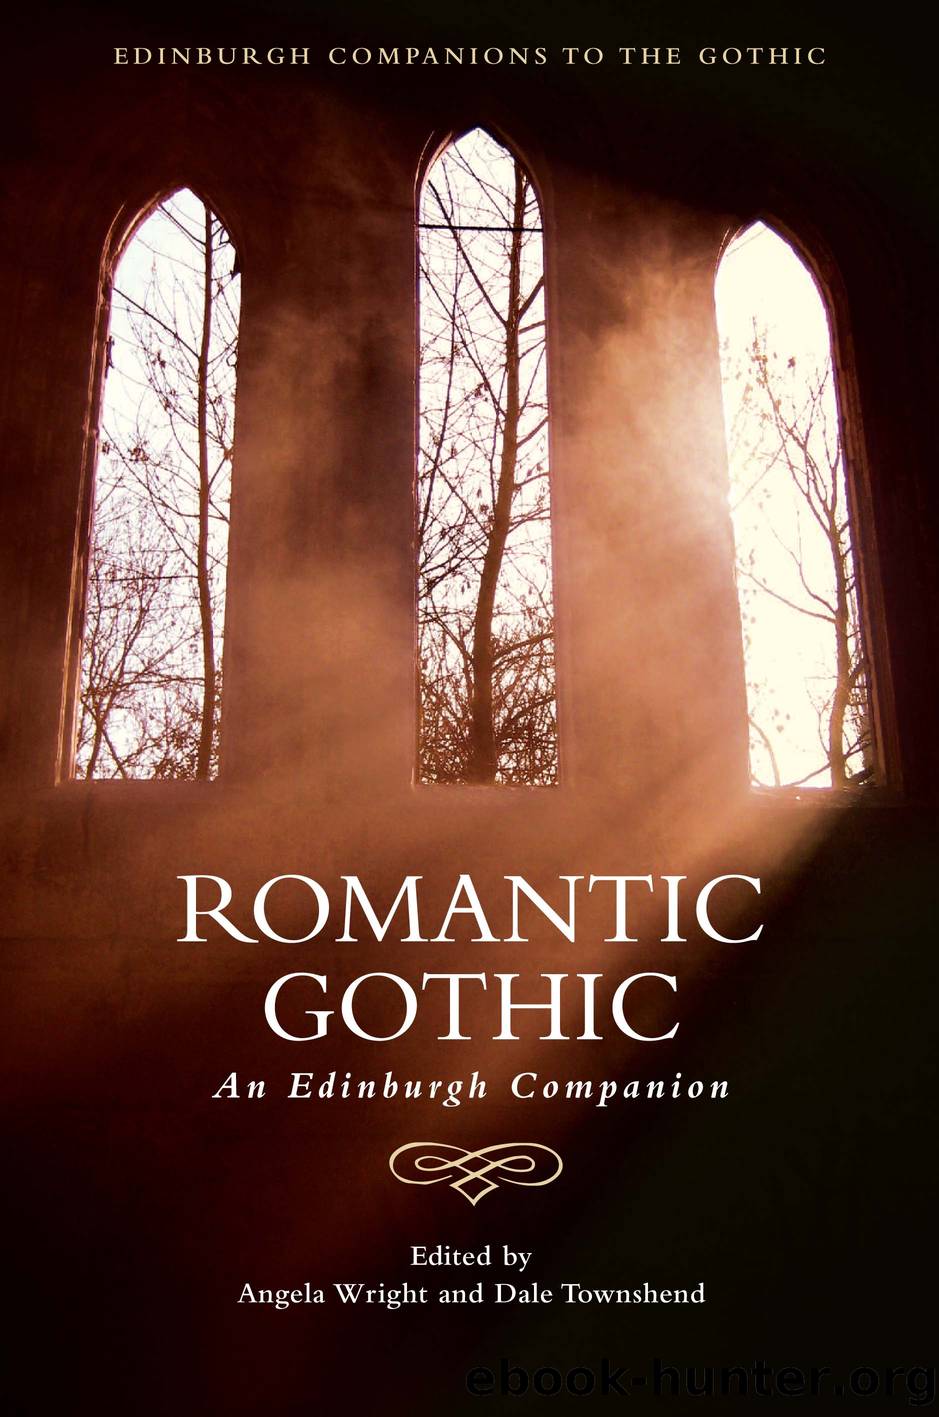 Romantic Gothic by Angela Wright Dale Townshend